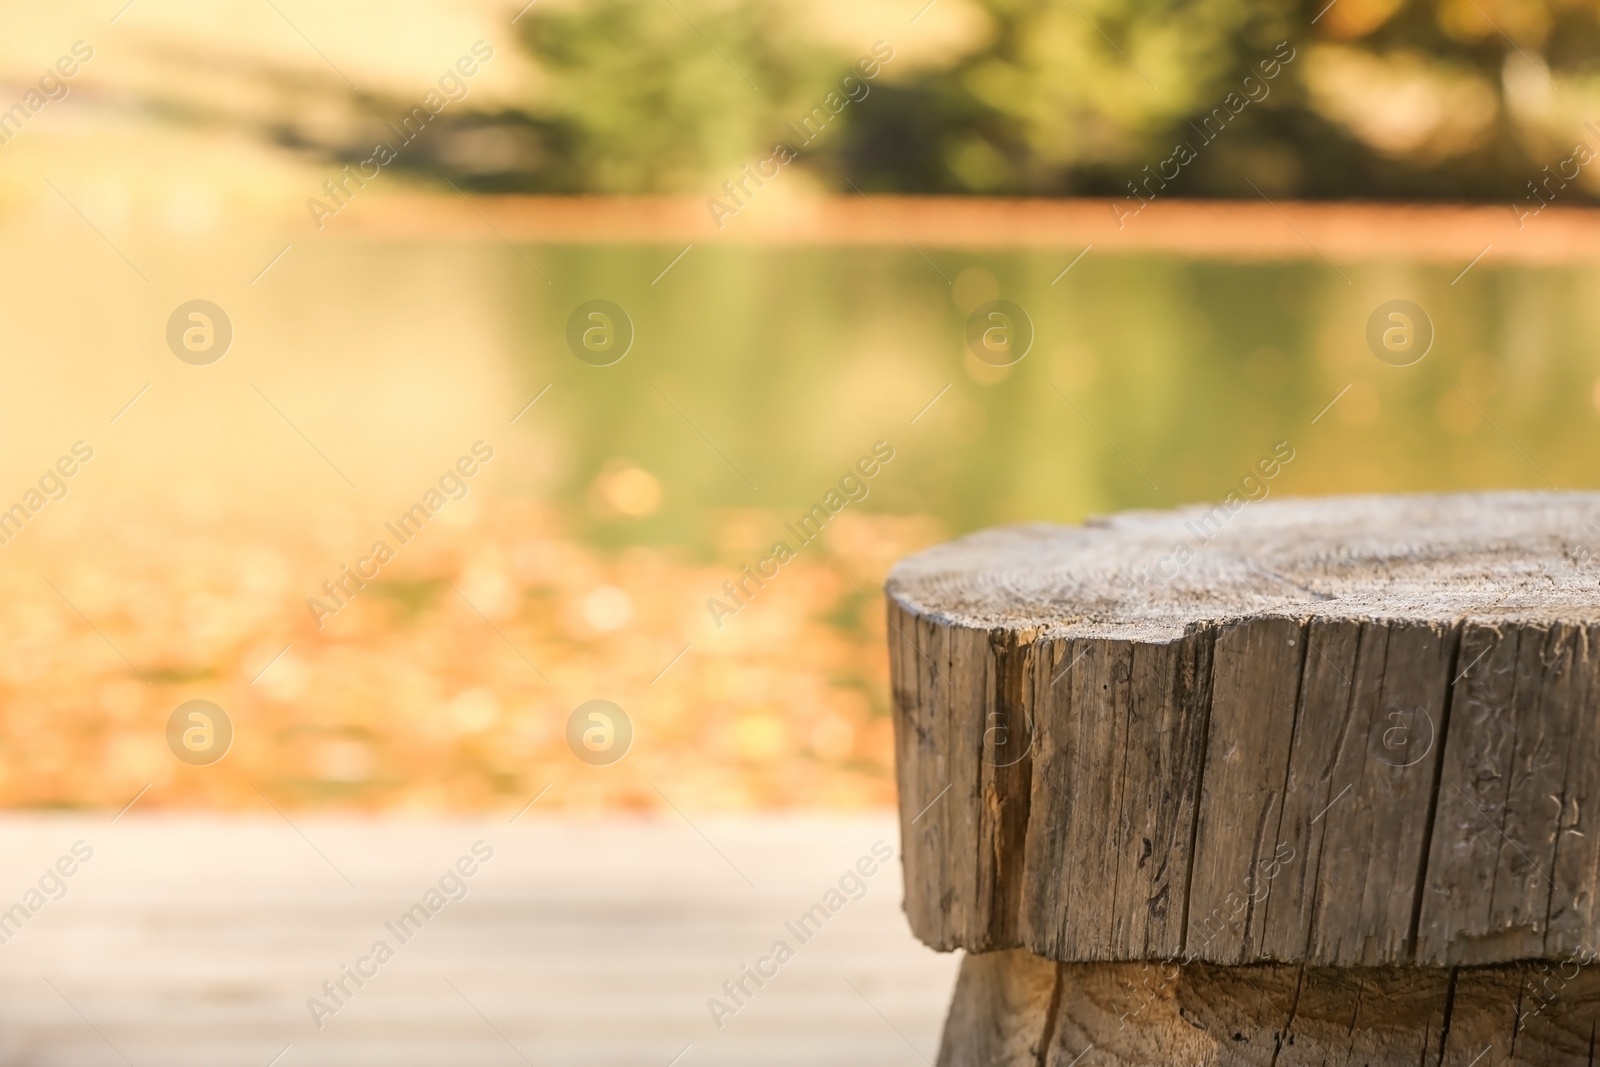 Photo of Rustic wooden stool near pond on sunny day